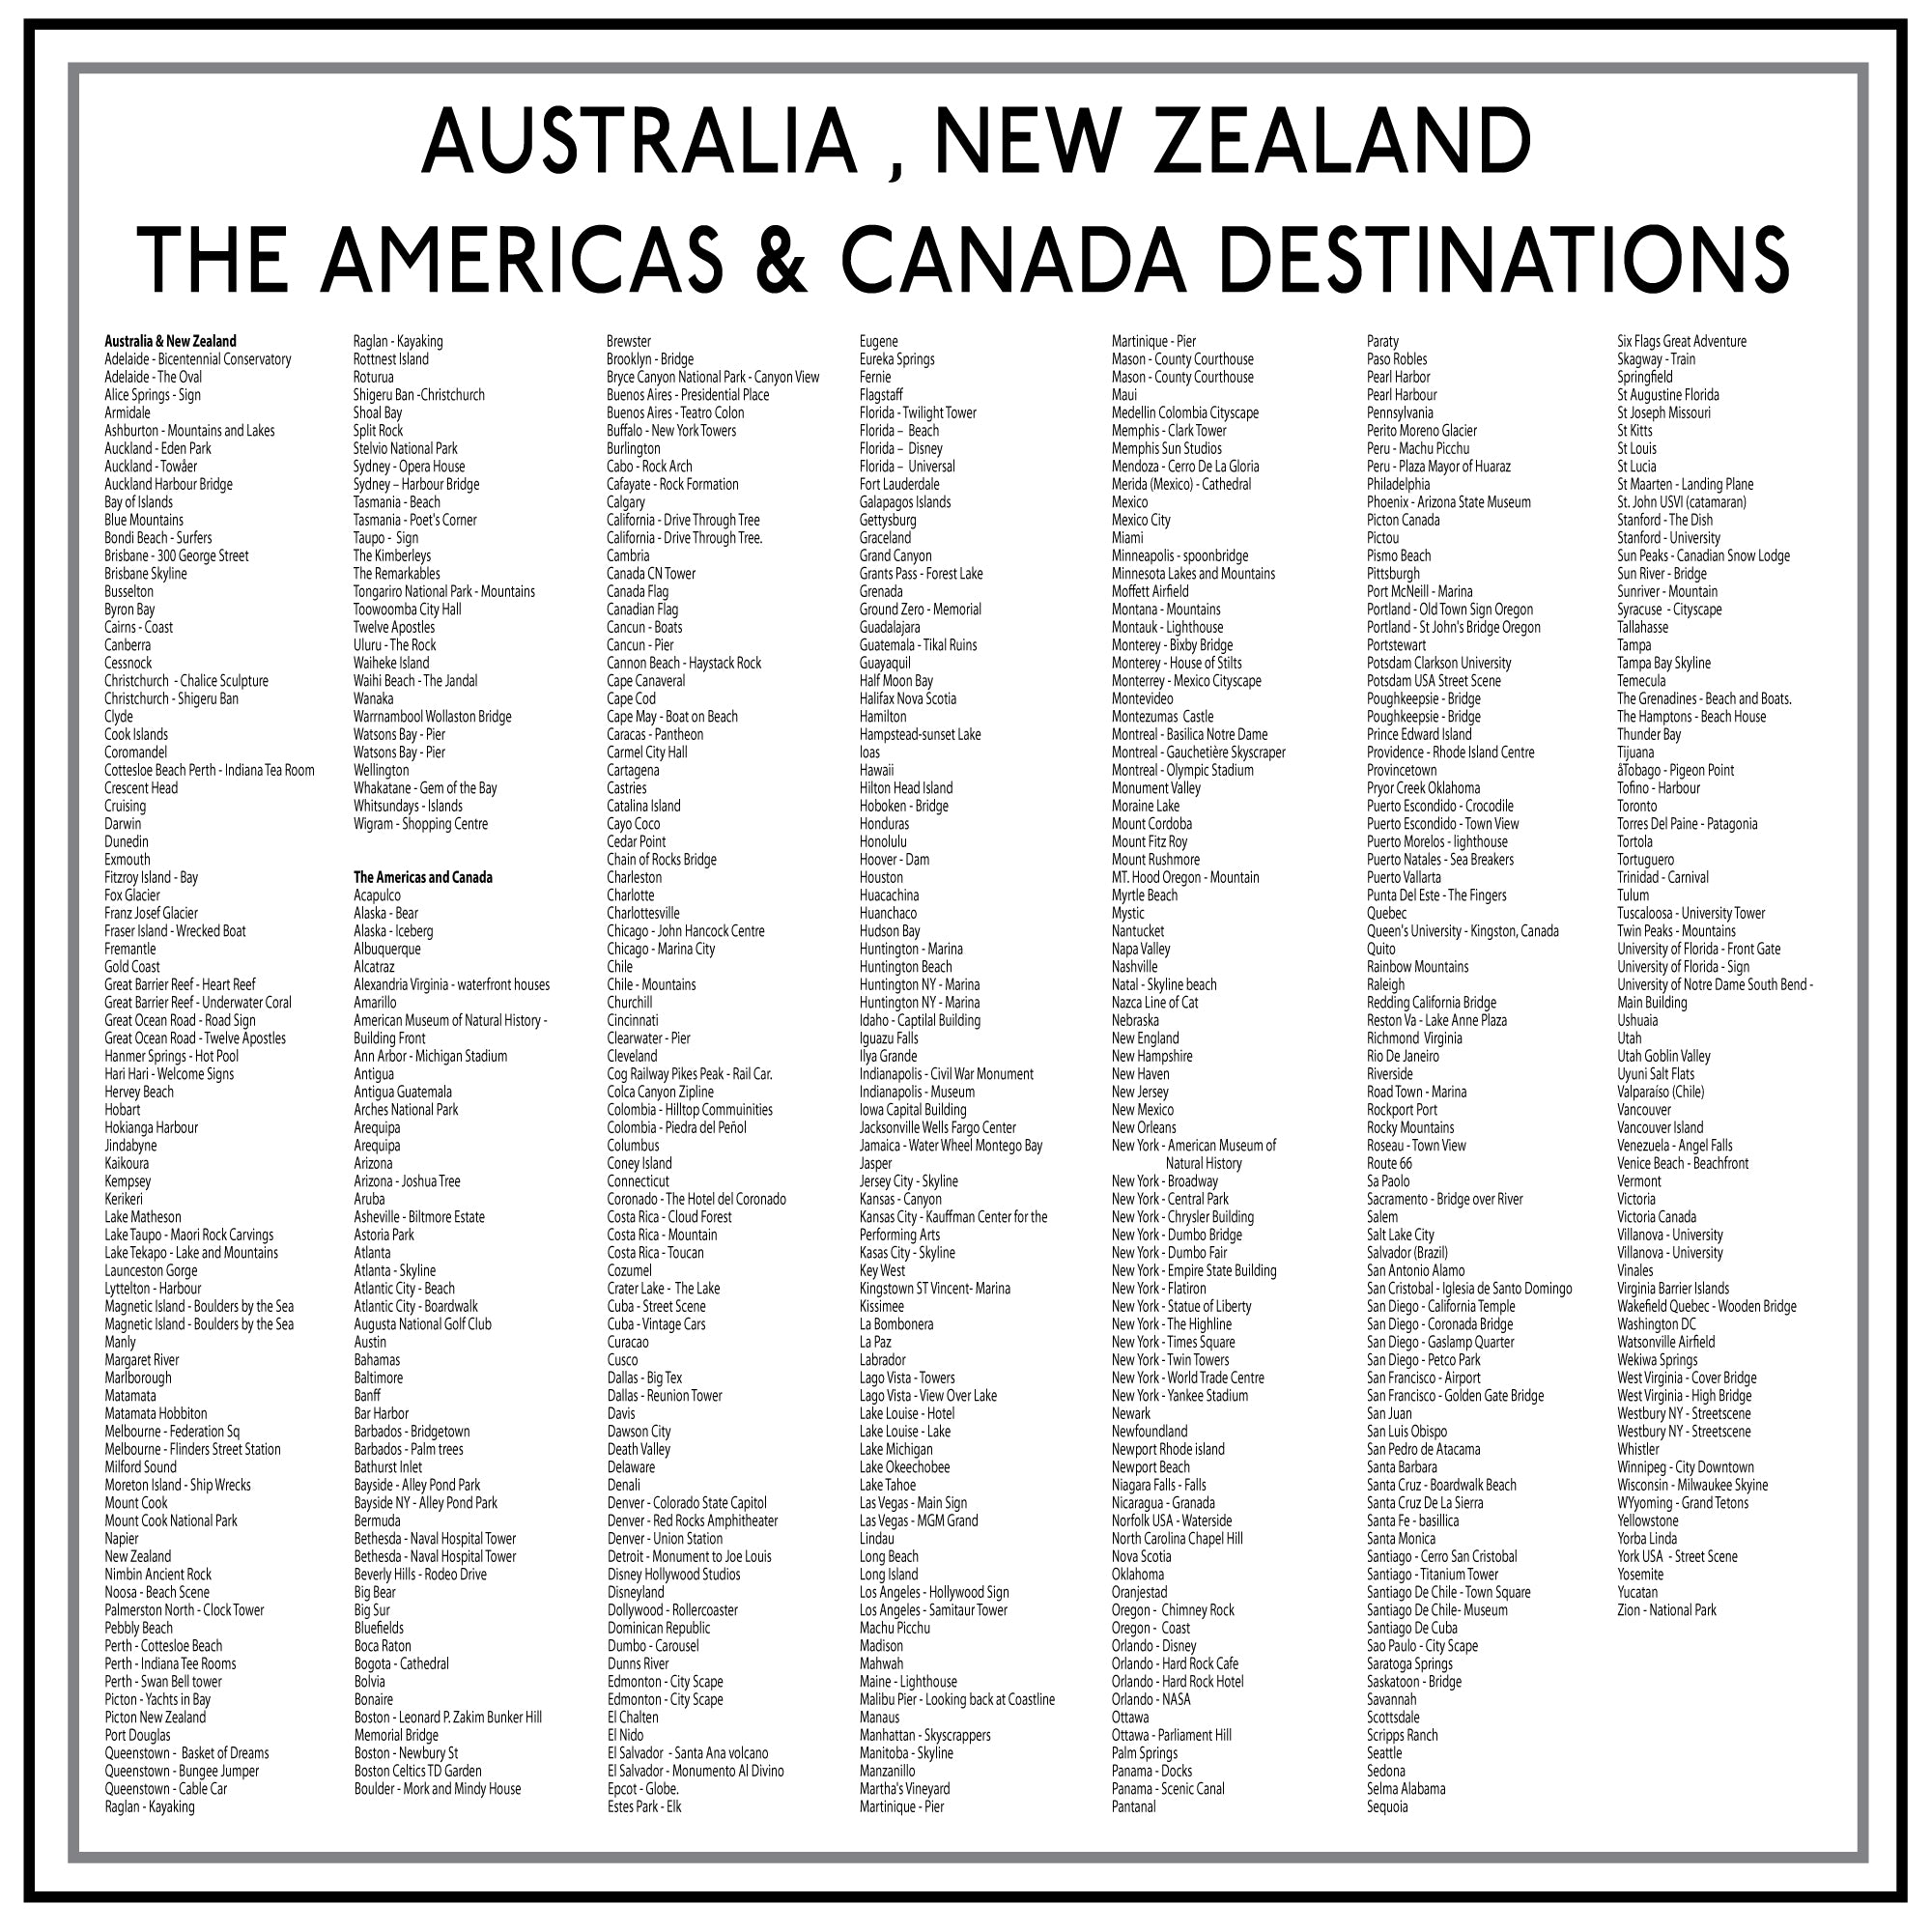 Image showing list of Australia, New Zealand, The Americas and Canada Destinations